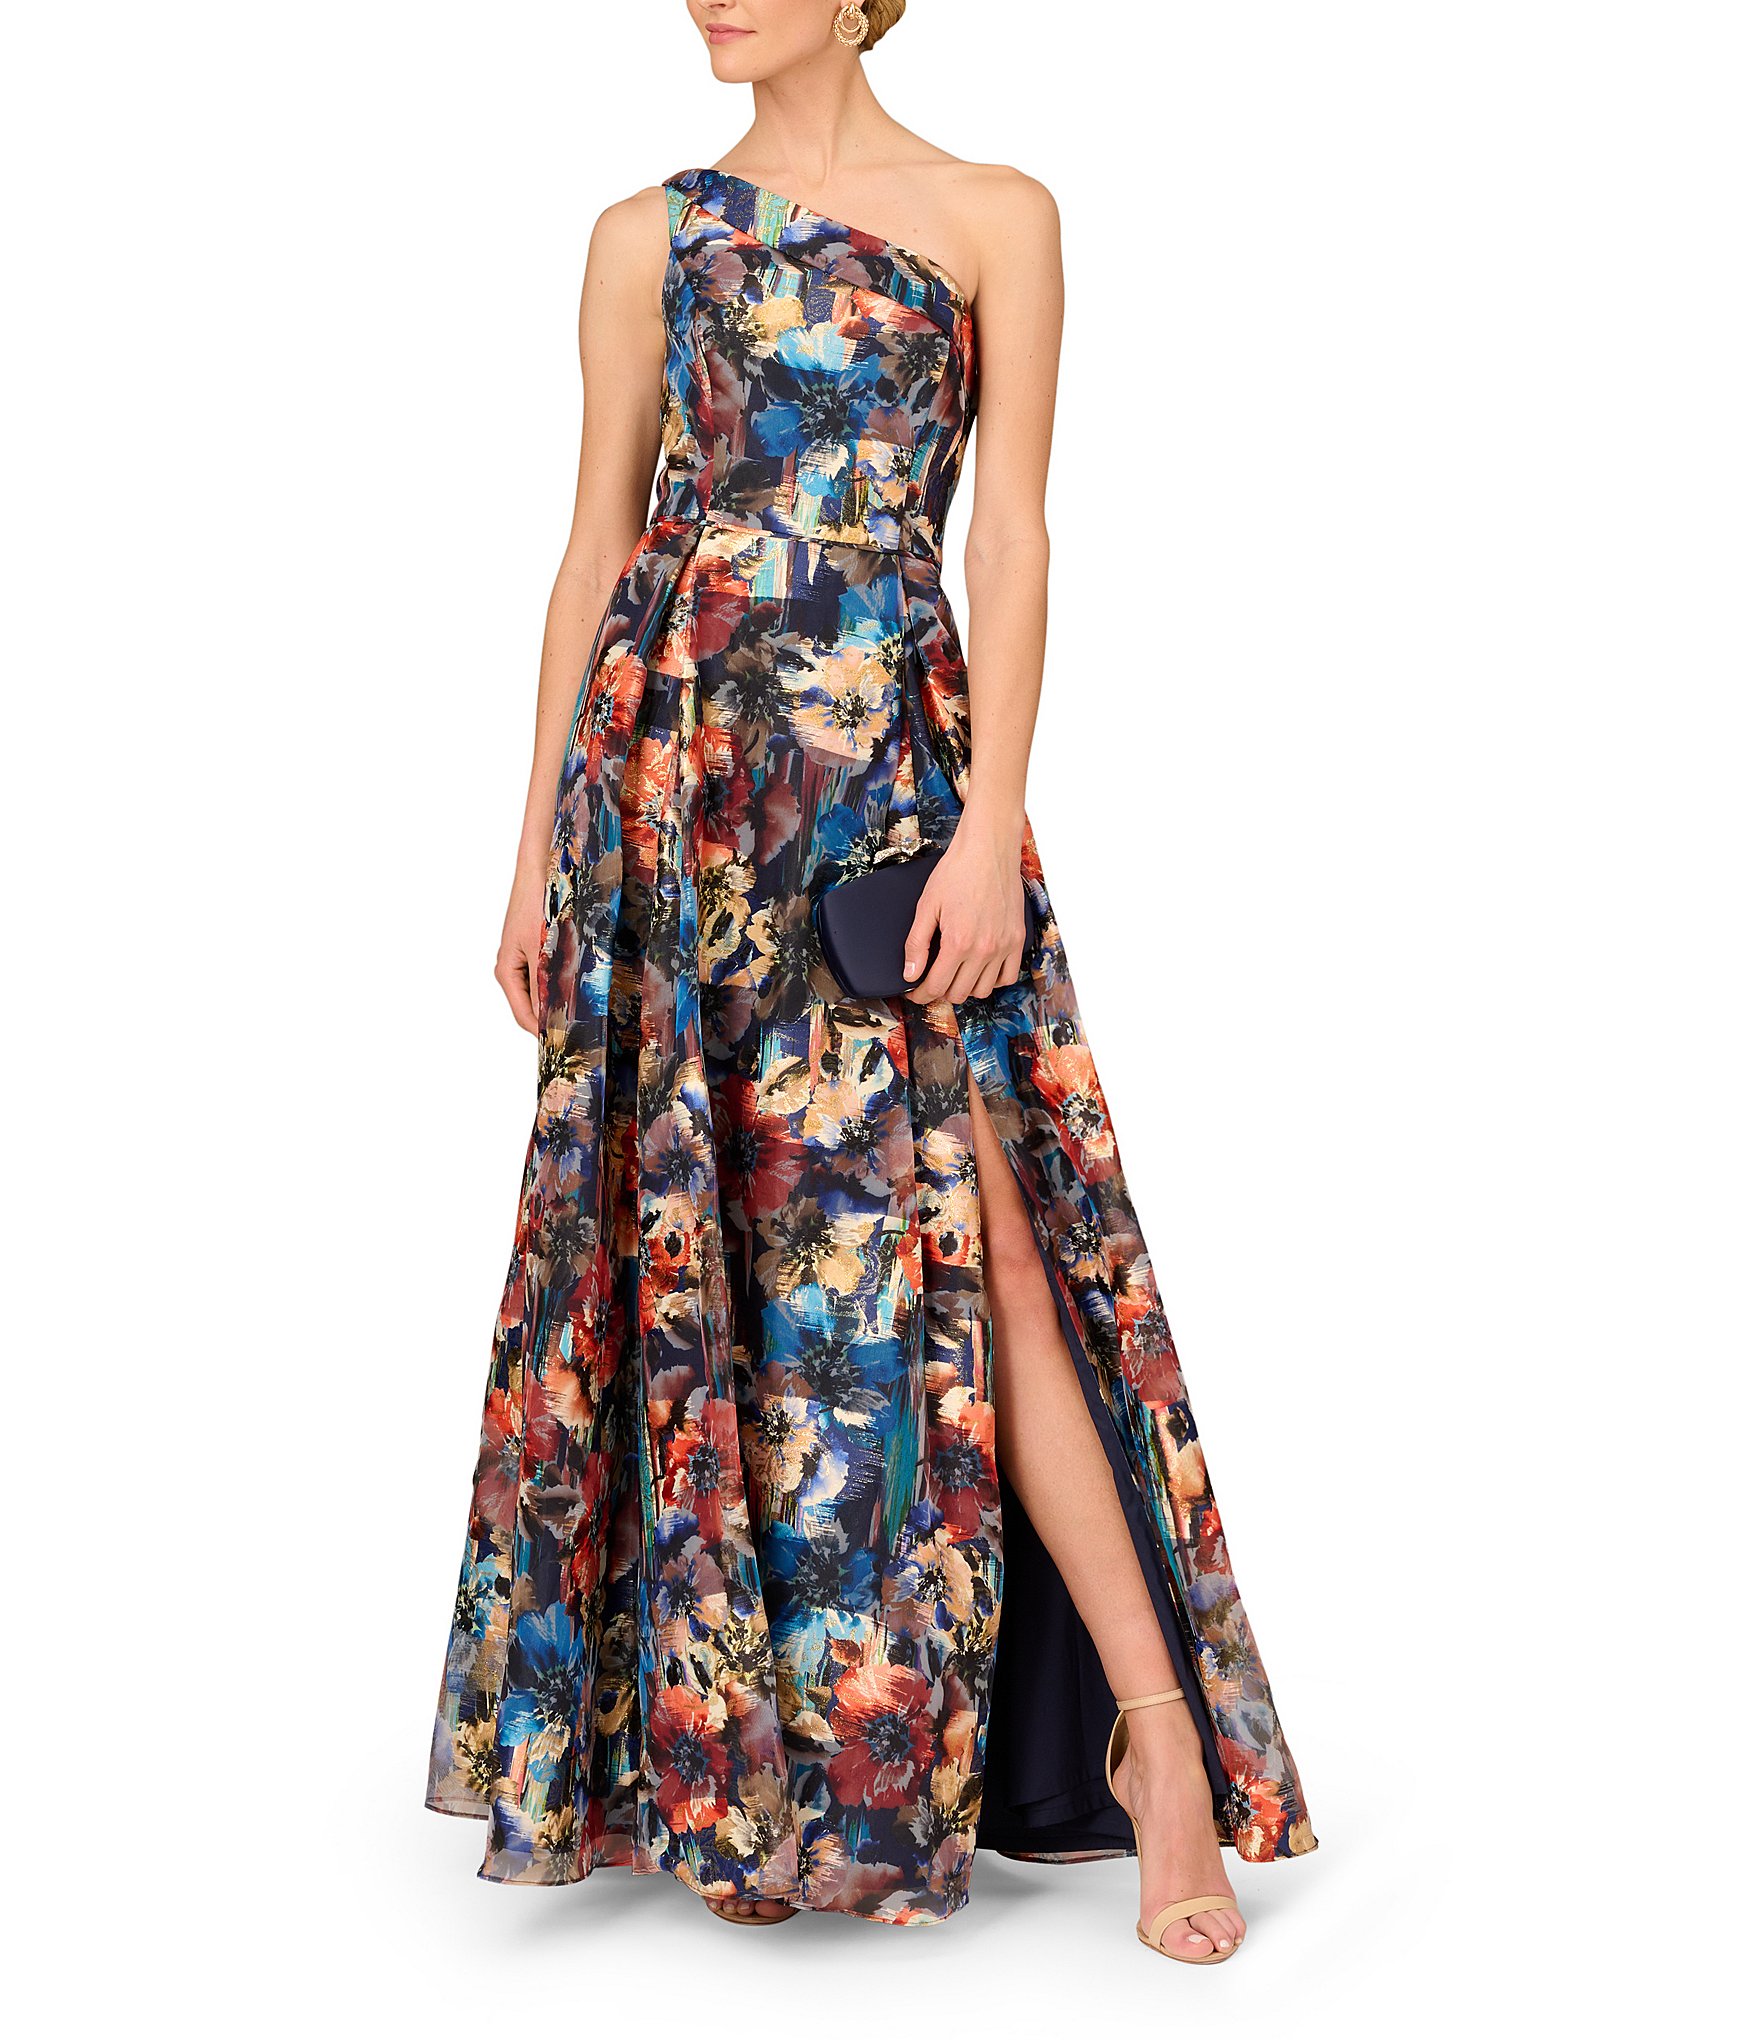 French Novelty: Jovani 22753 Satin Floral Print Ball Gown